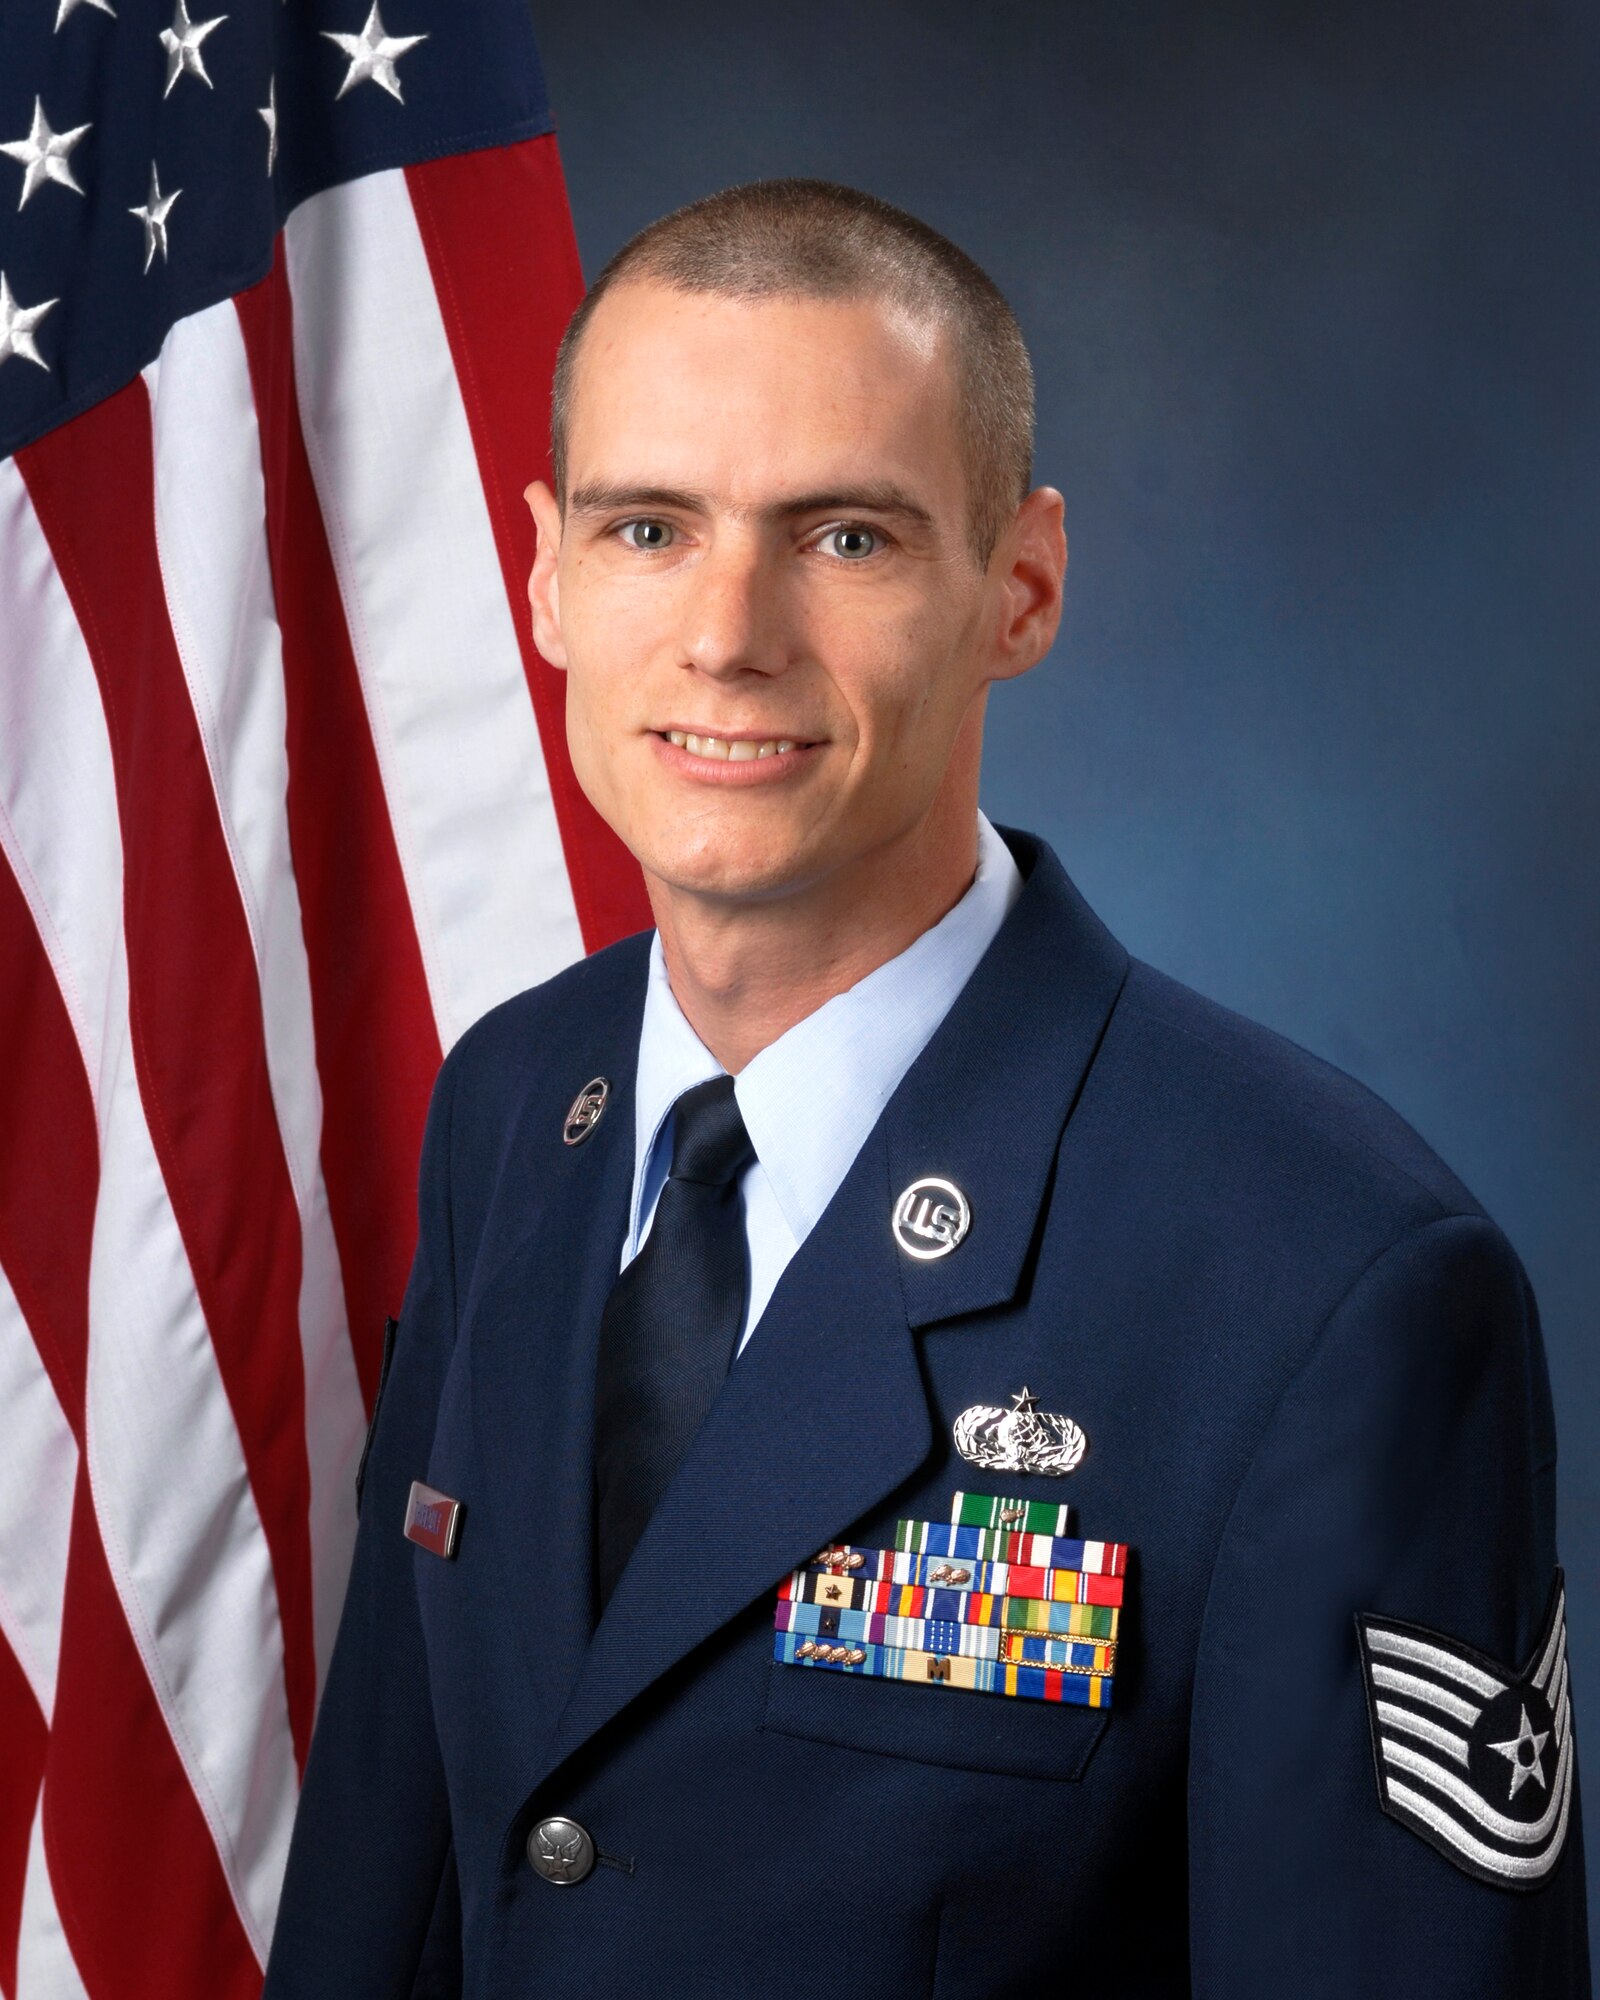 Tech. Sgt. Lawrence Thibeault, a cyberspace operator assigned to the 221st Combat Communications Squadron, 254th Combat Communications Group, Texas Air National Guard,is nominated for the 2014 Noncommissioned Officers Association Vanguard Award for his heroism during the West, Texas fertilizer plant explosion on April 17, 2013. He provided lifesaving aid for five elderly residents of the West Rest Haven Nursing Home and coordinated their evacuation for follow-on medical care.